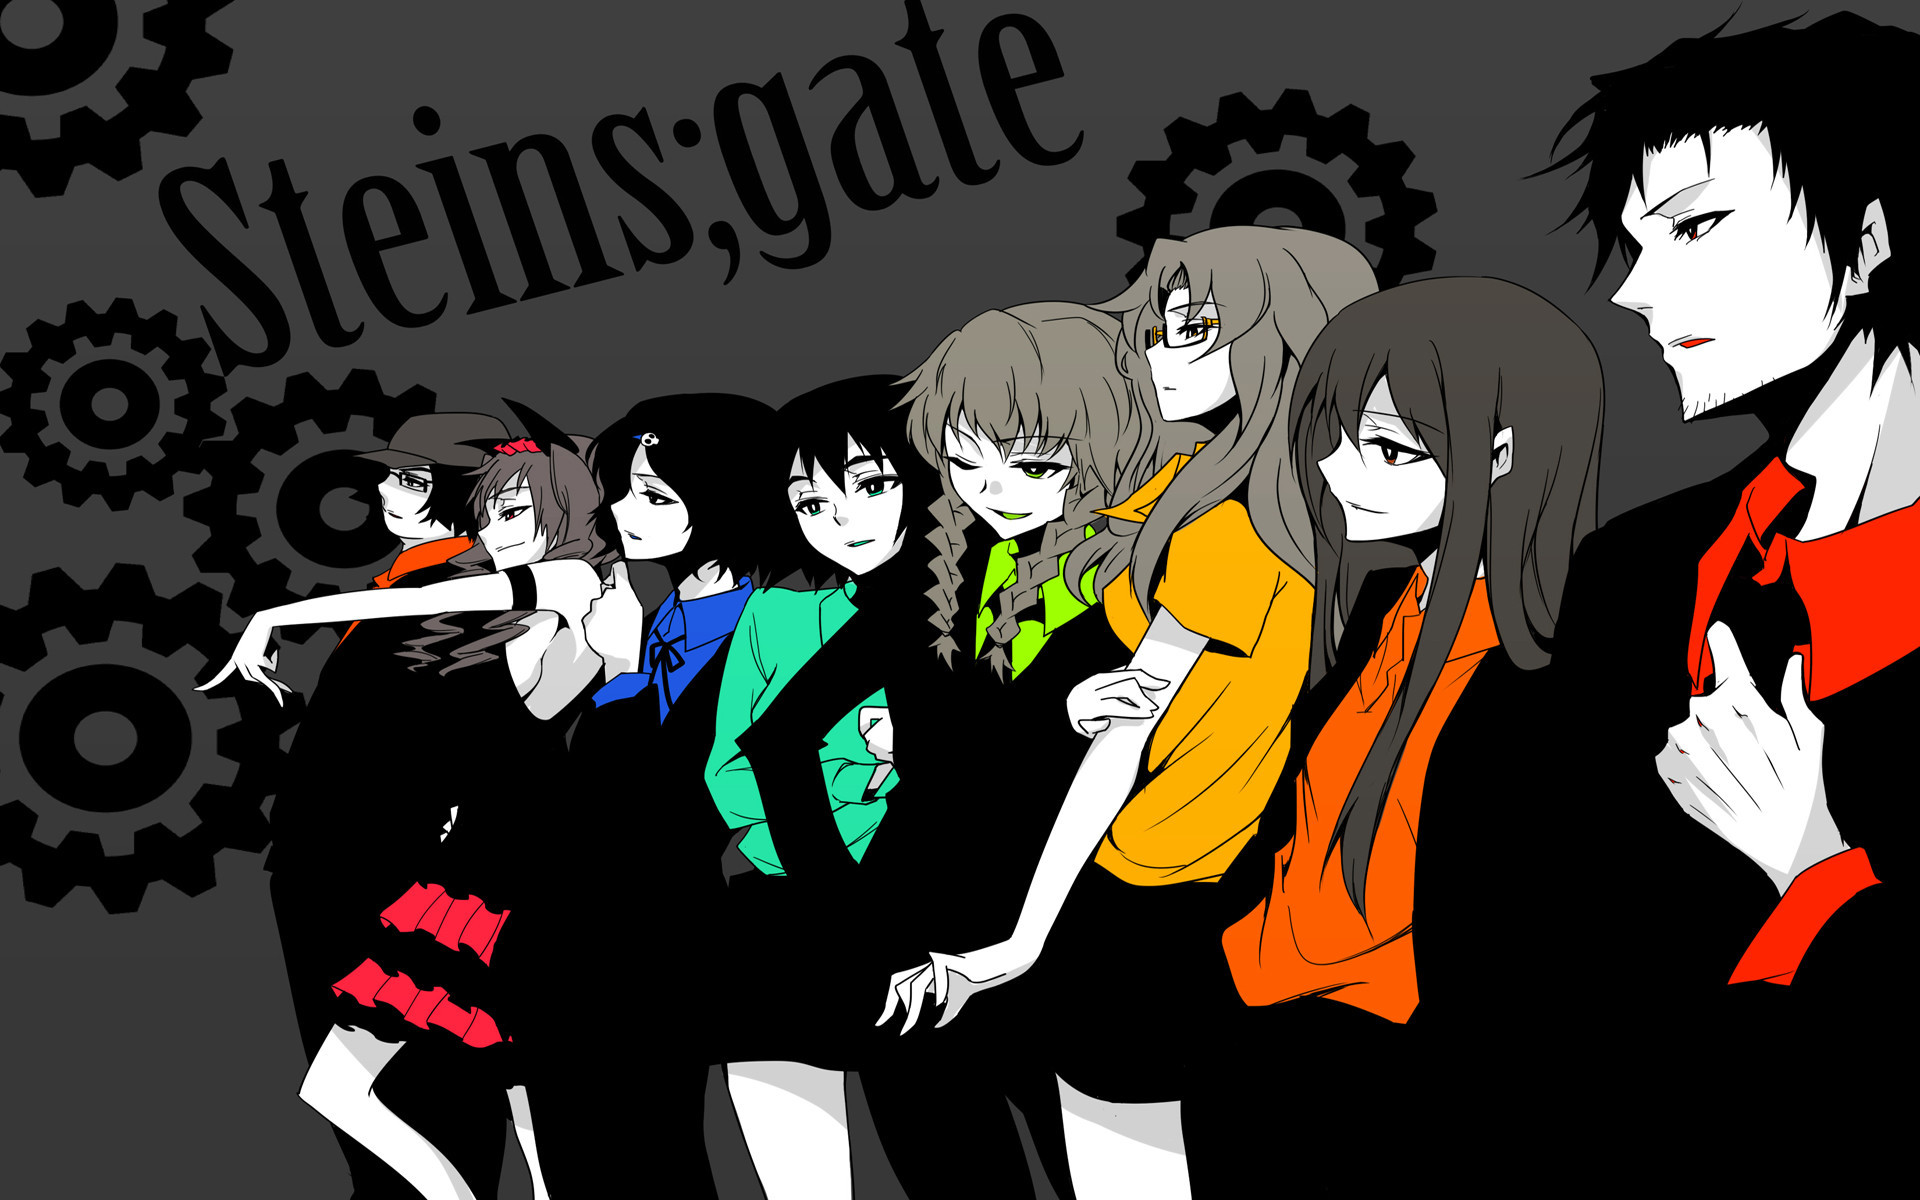 Found this cool SteinsGate and Reservoir Dogs mix wallpaper today 1920×1200